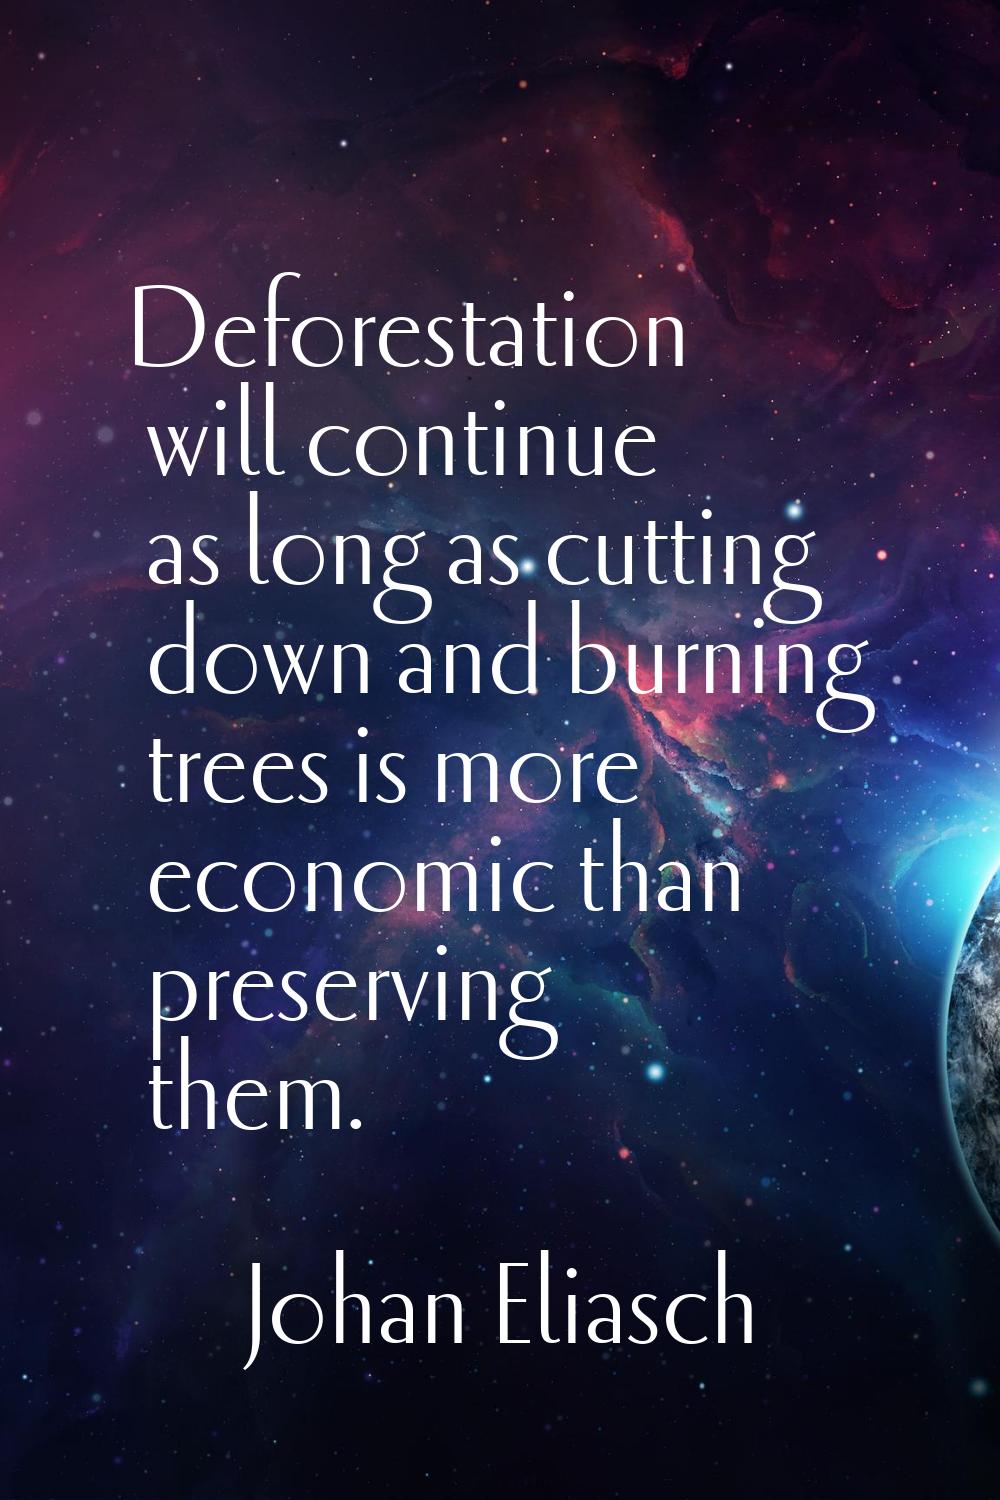 Deforestation will continue as long as cutting down and burning trees is more economic than preserv